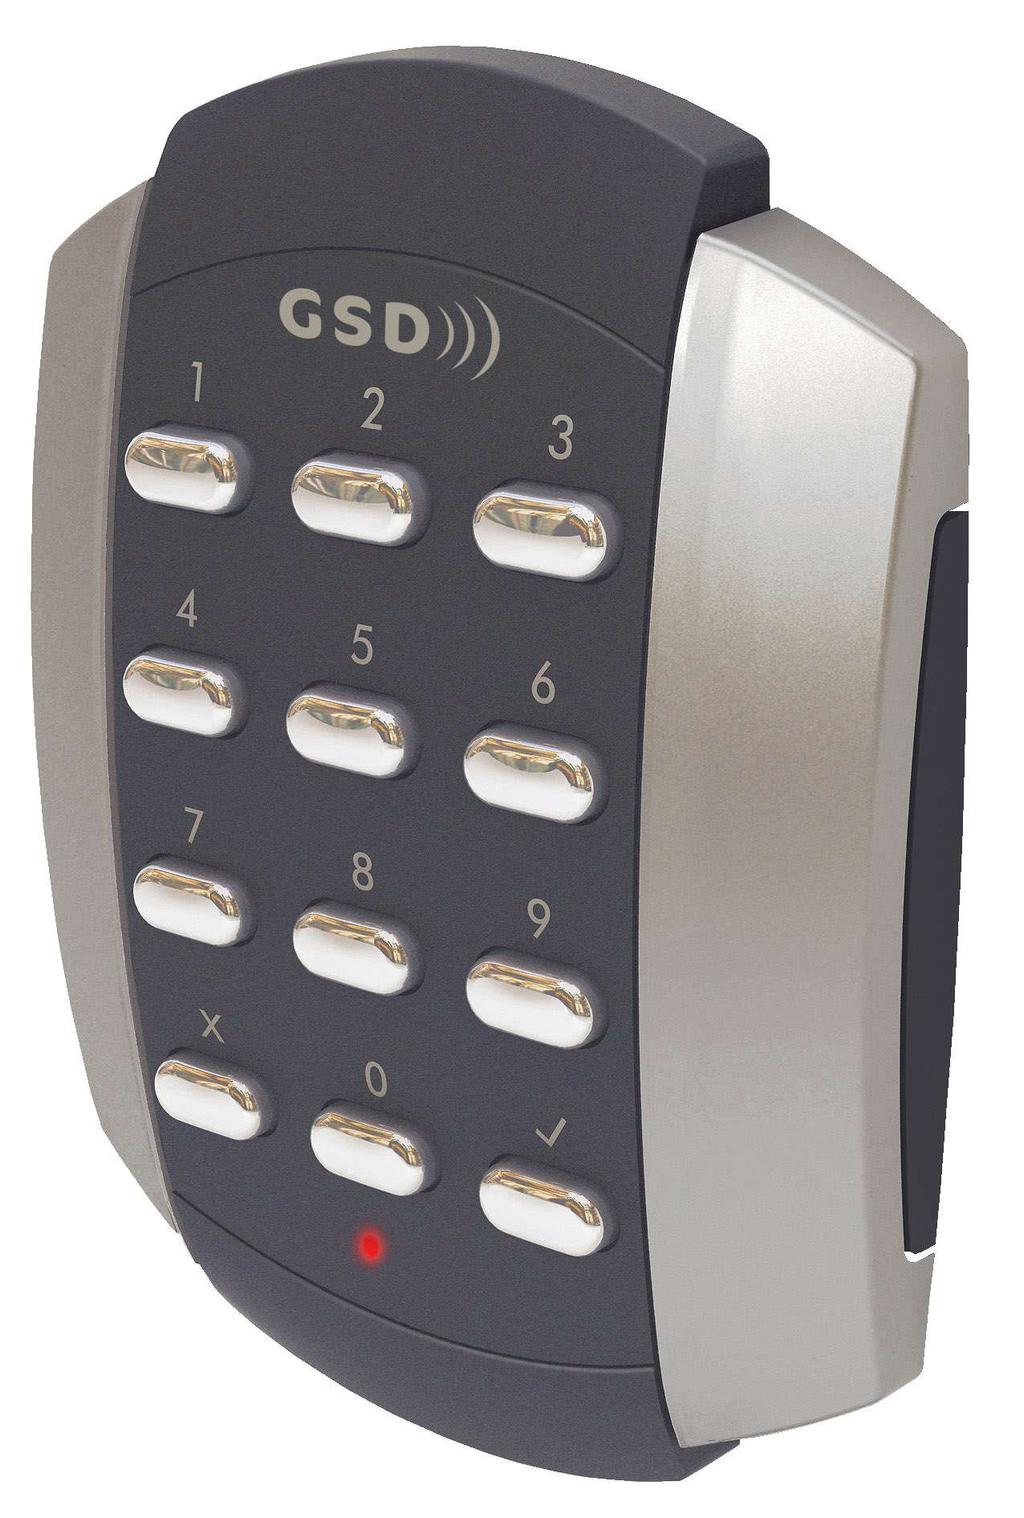 YOUR SECURITY IS OUR PRIORITY Other products from GSD Wireless Network System GSD